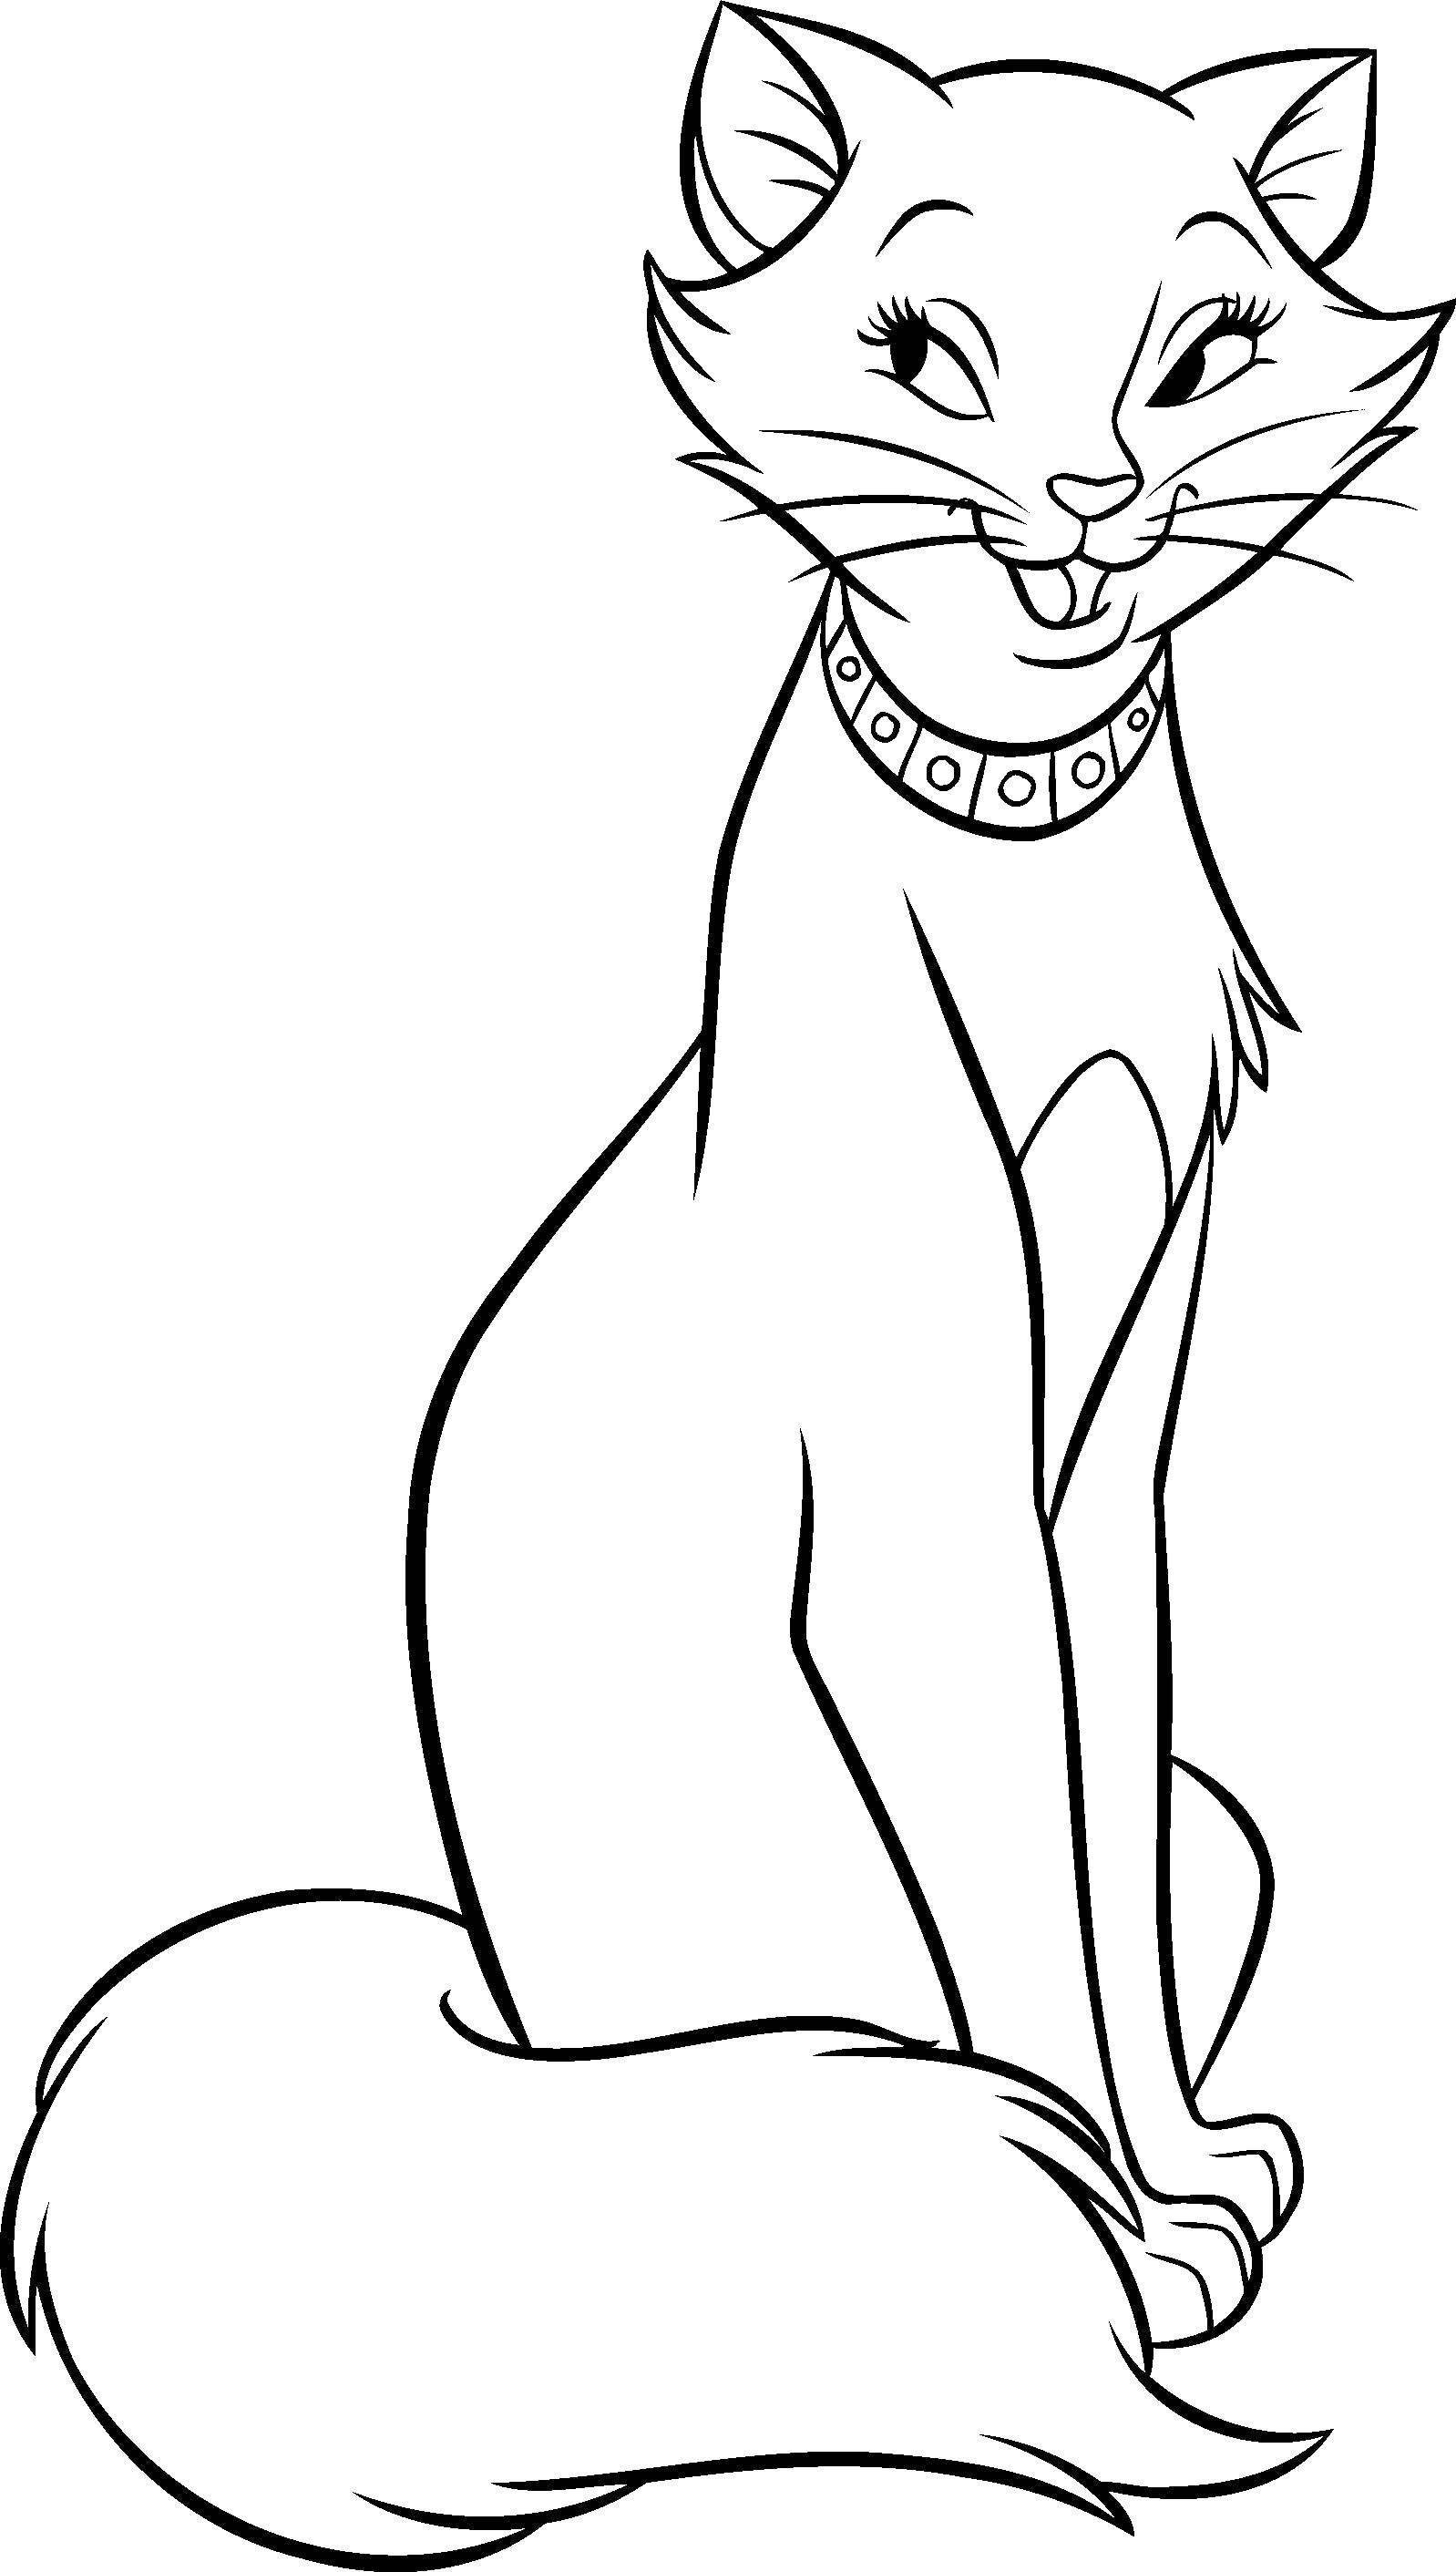 Coloring Cat with necklace. Category cats aristocrats. Tags:  cat, necklace, tail.